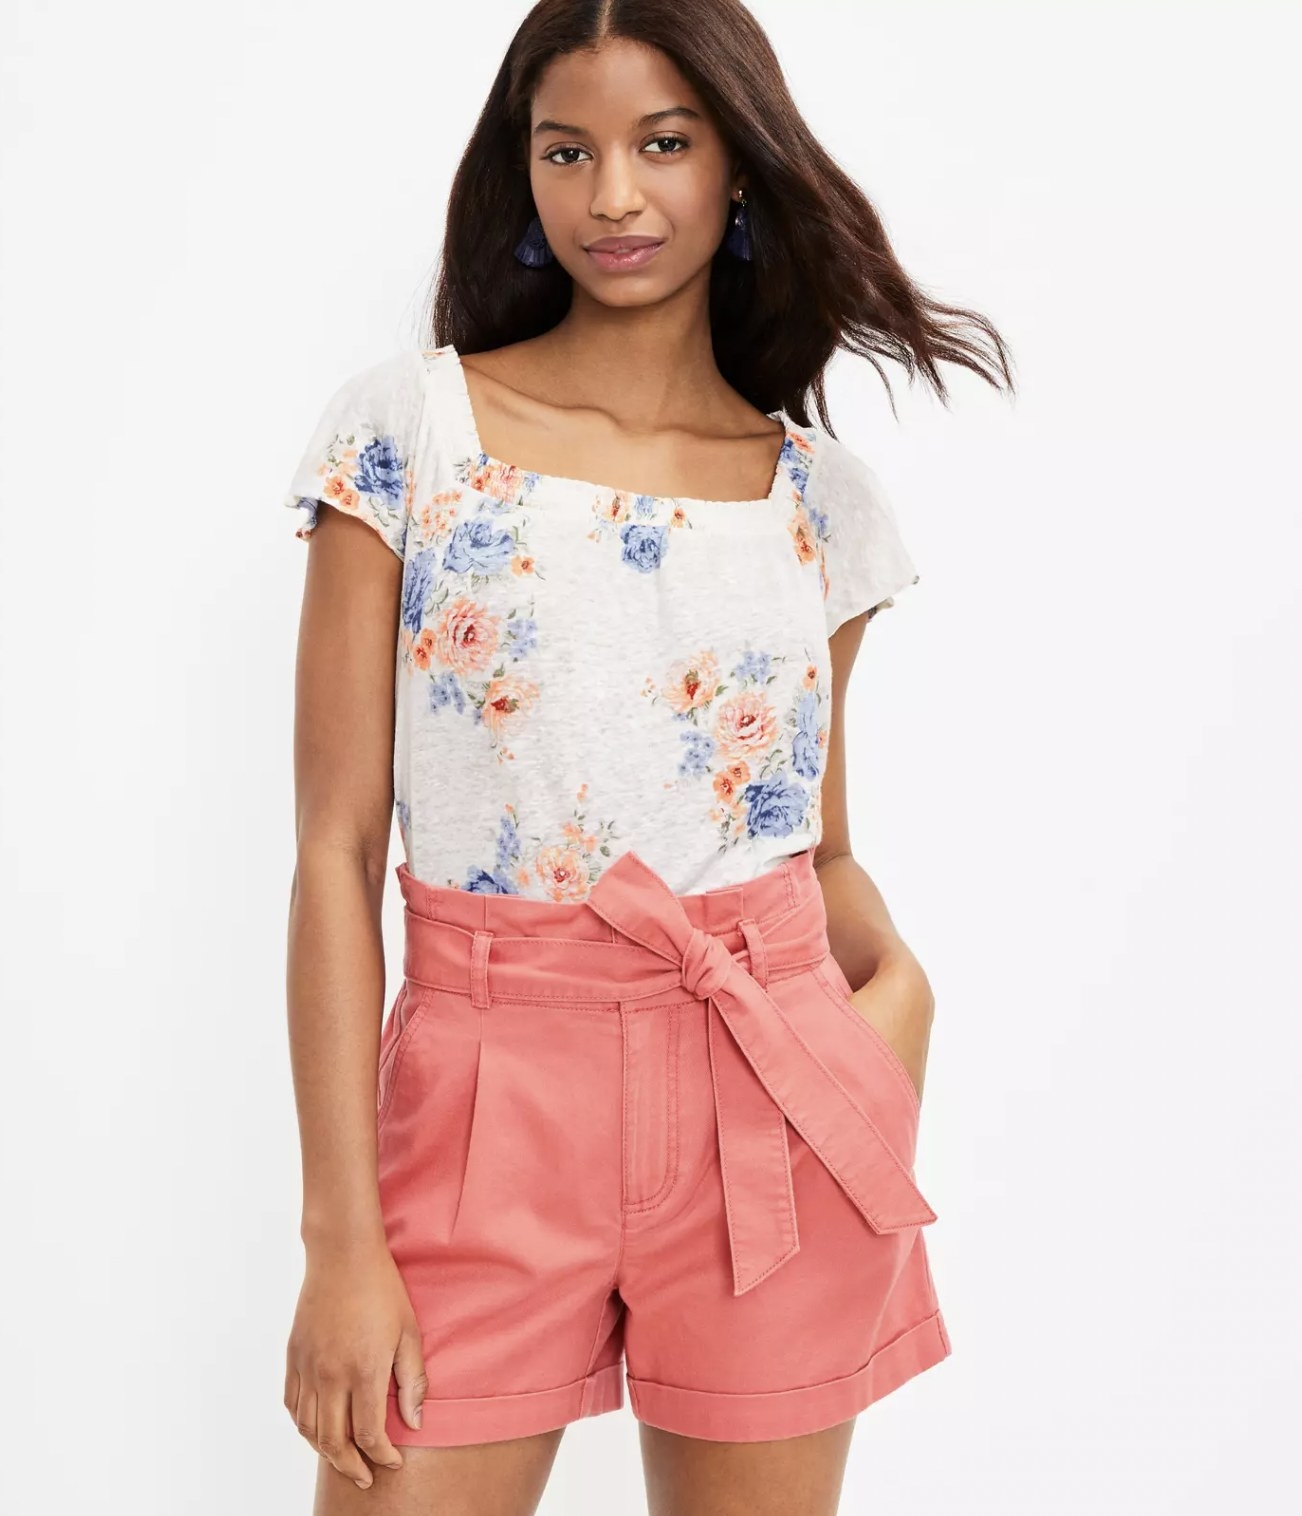 model wearing the pink tie waist shorts with white floral top